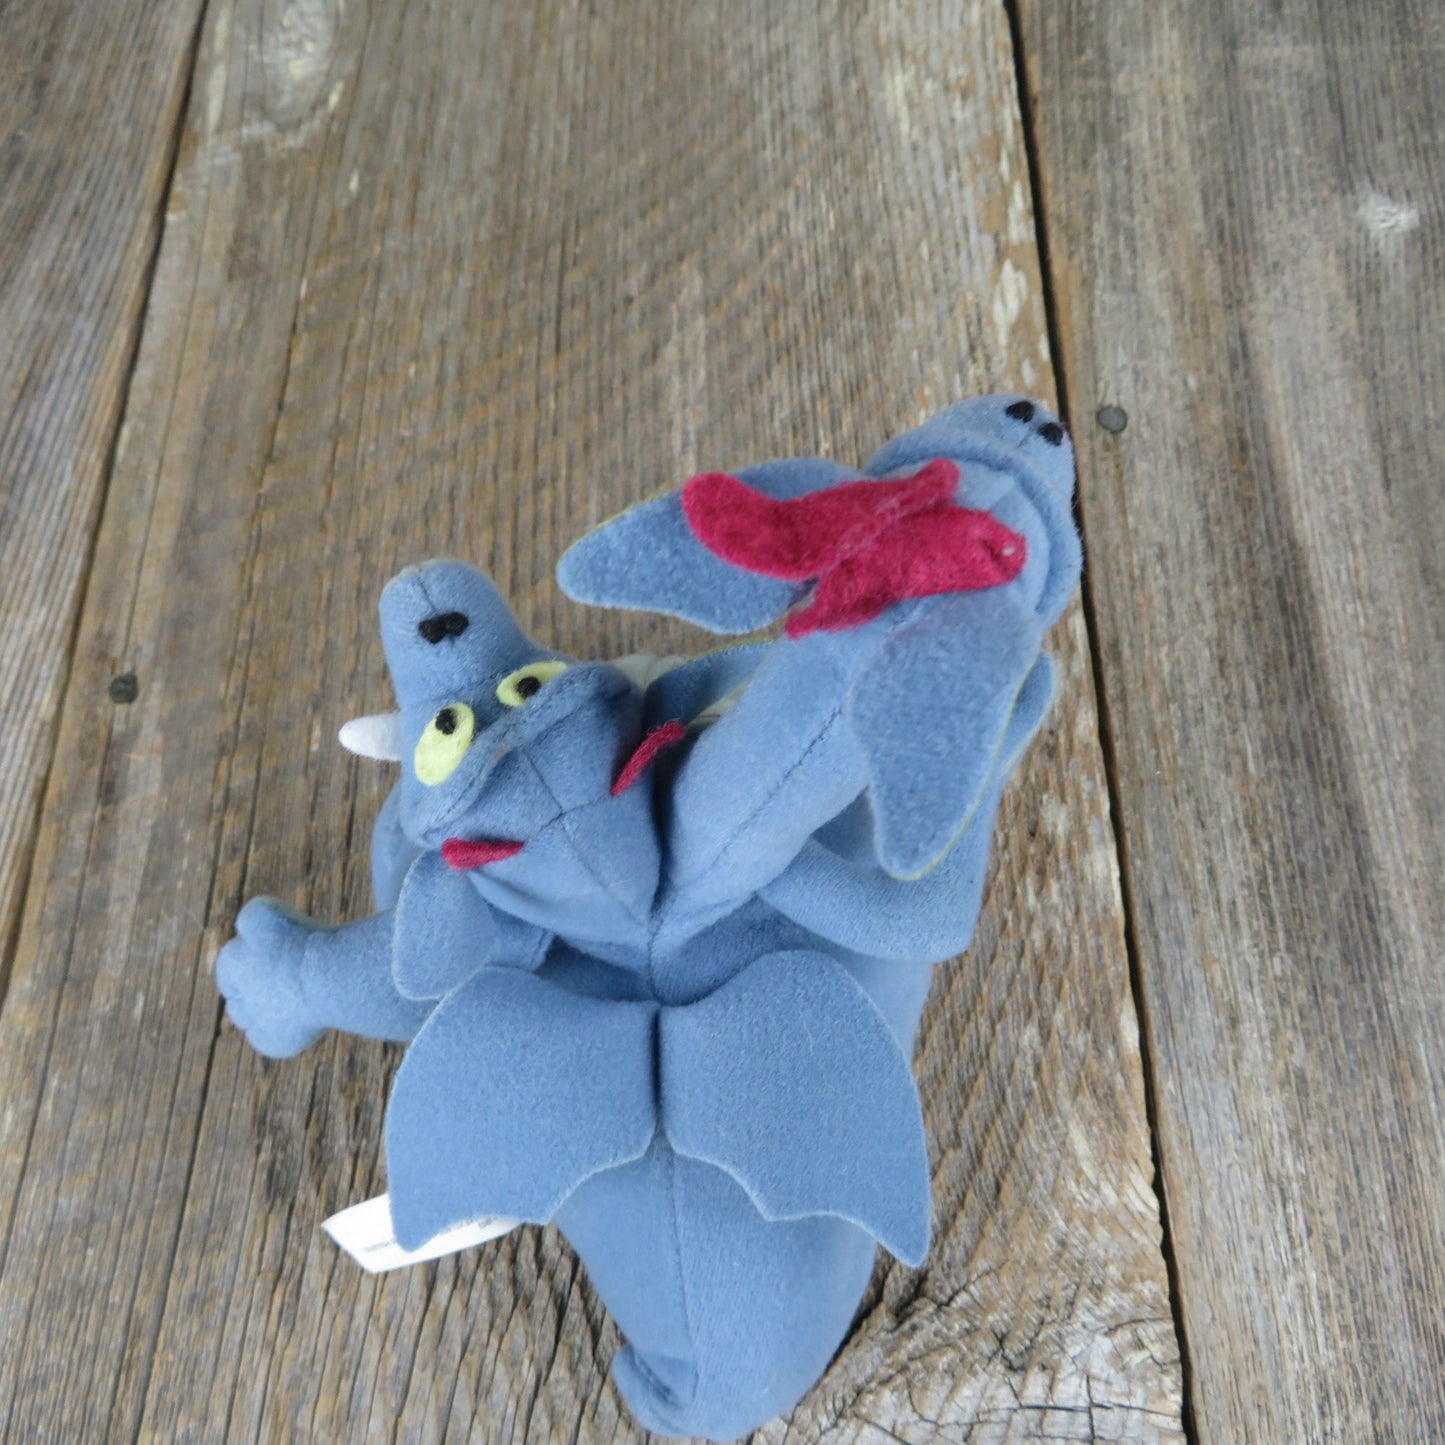 Vintage Devon Cornwall Dragon Bean Bag Plush Quest for Camelot Beanie Warner Brothers Store Stuffed Animal 1998